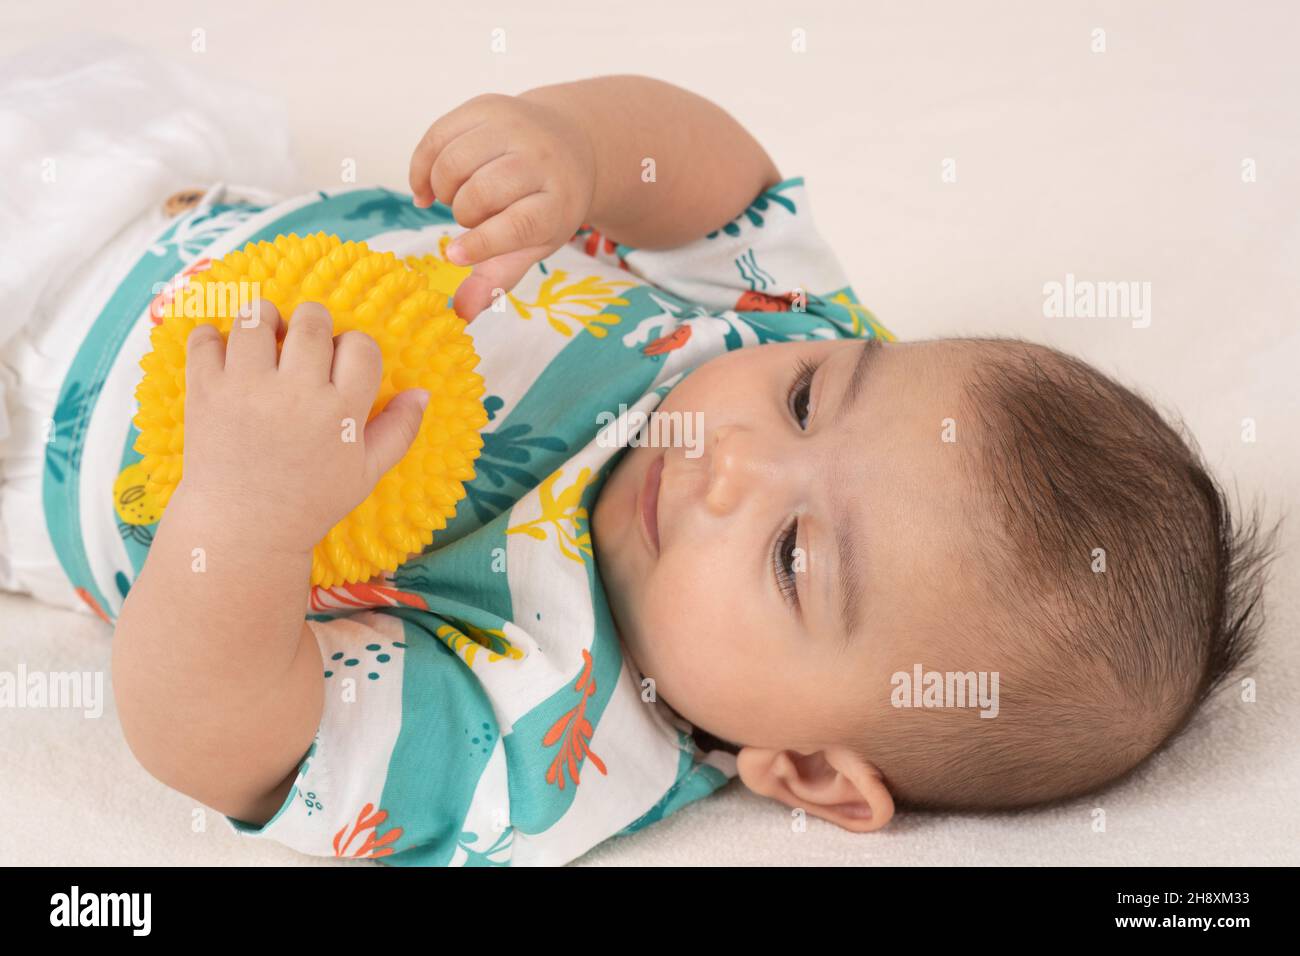 3 month old baby boy on back holding plastic toy ball holding with one hand and feeling texture of nubs with the other hand, using fingers Stock Photo